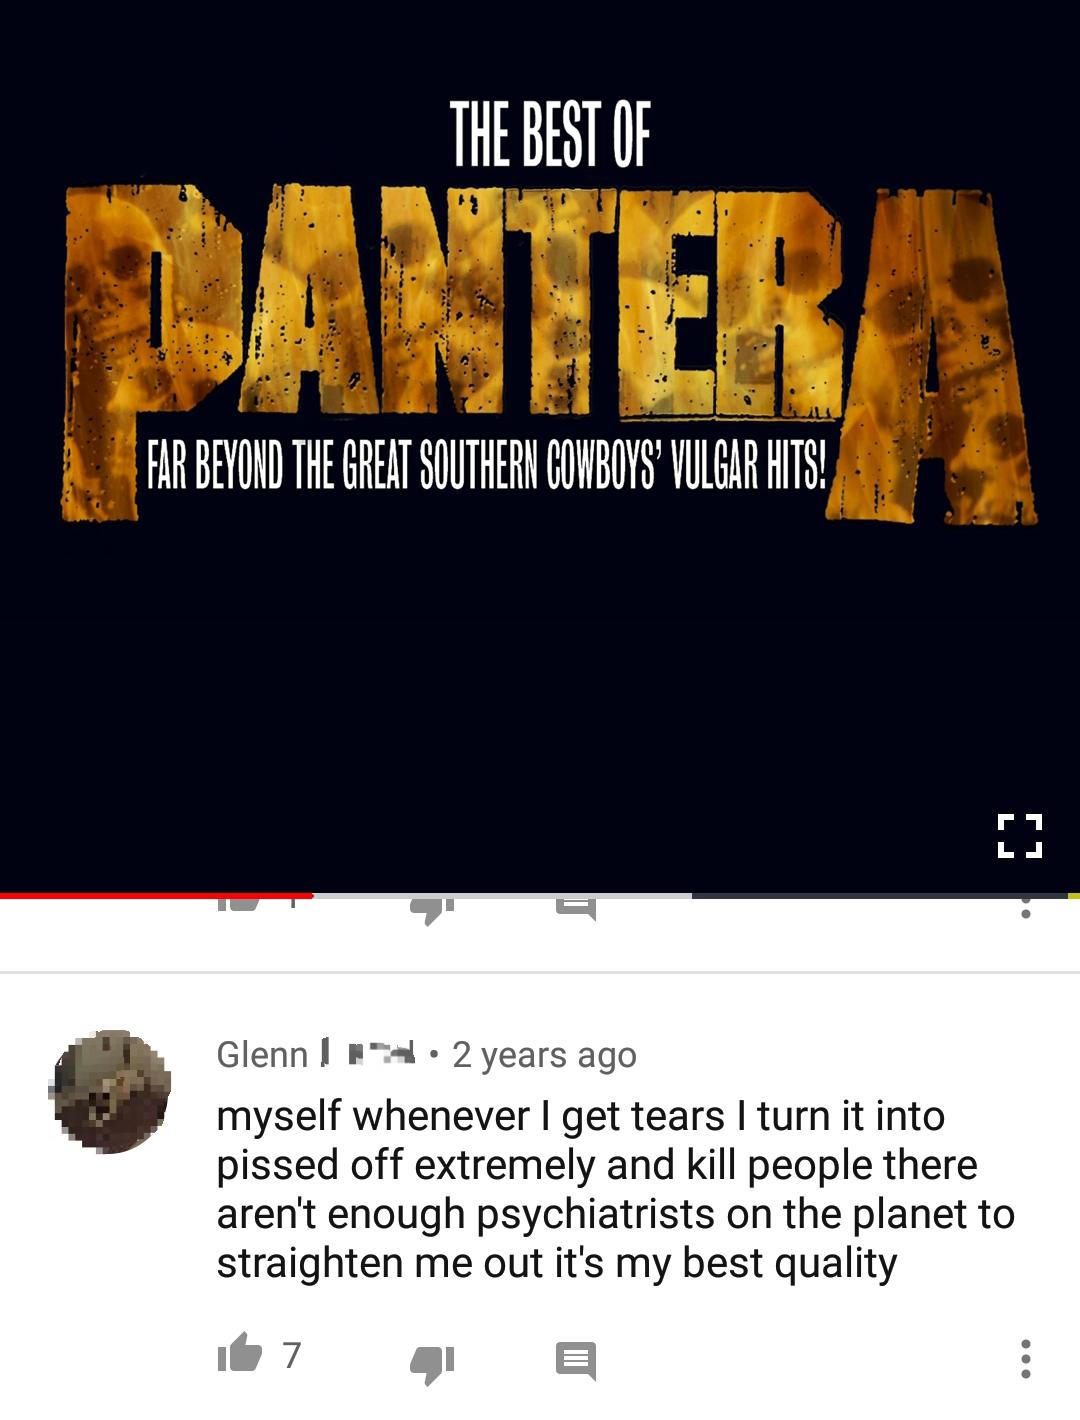 website - The Best Of Pantera Far Beyond The Great Southern Cowboys Vulgar Hits! Glenn | 2 years ago myself whenever I get tears I turn it into pissed off extremely and kill people there aren't enough psychiatrists on the planet to straighten me out it's 